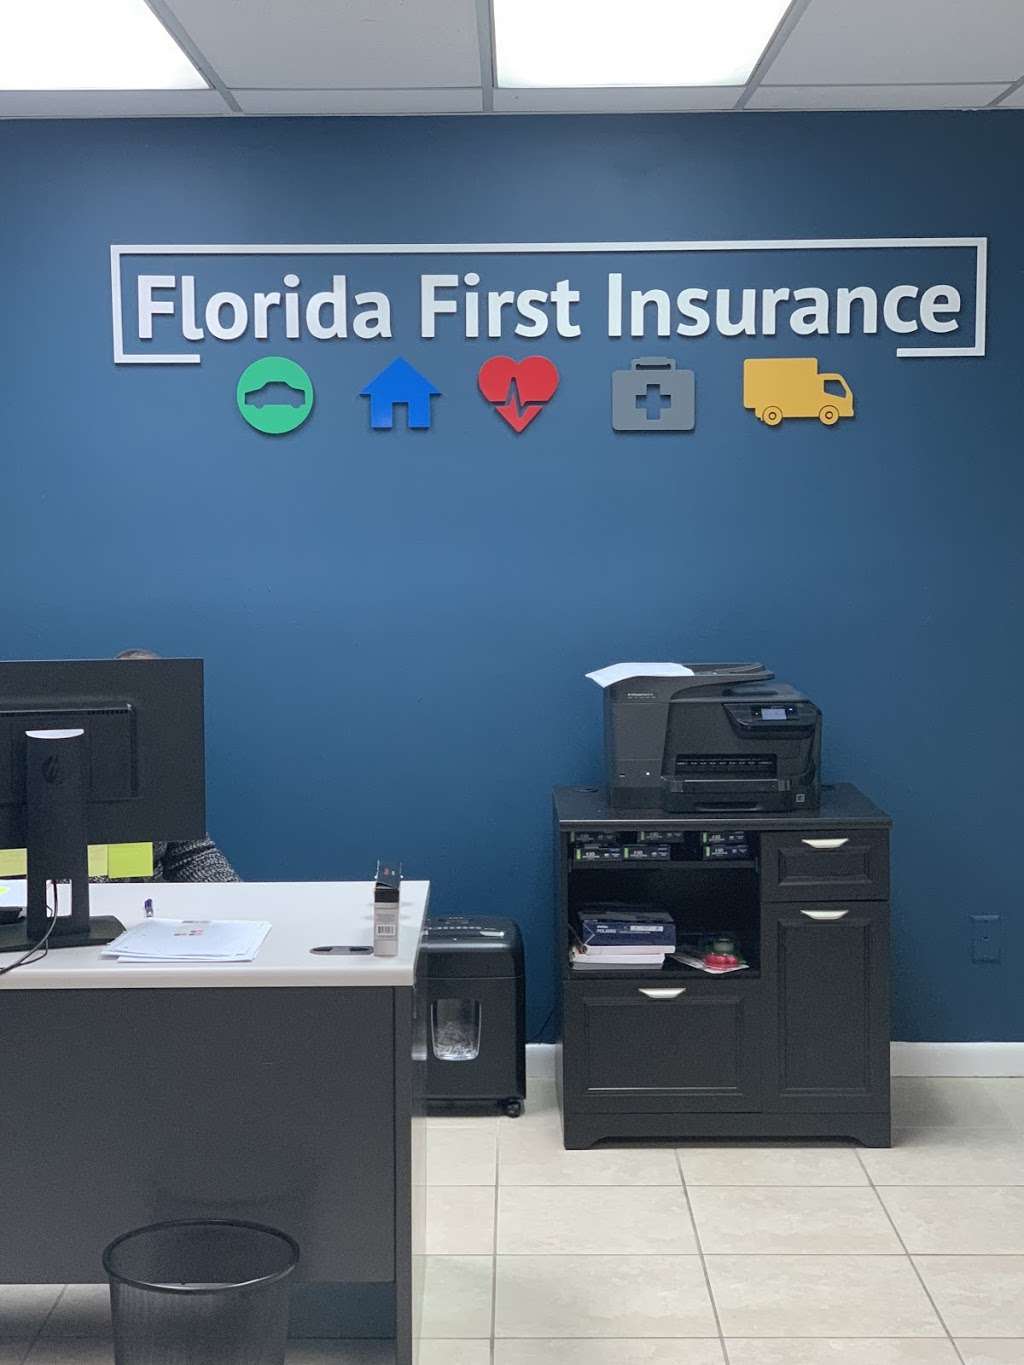 Florida First Insurance | 2517 NW 72nd Ave, Miami, FL 33122, USA | Phone: (305) 702-0412